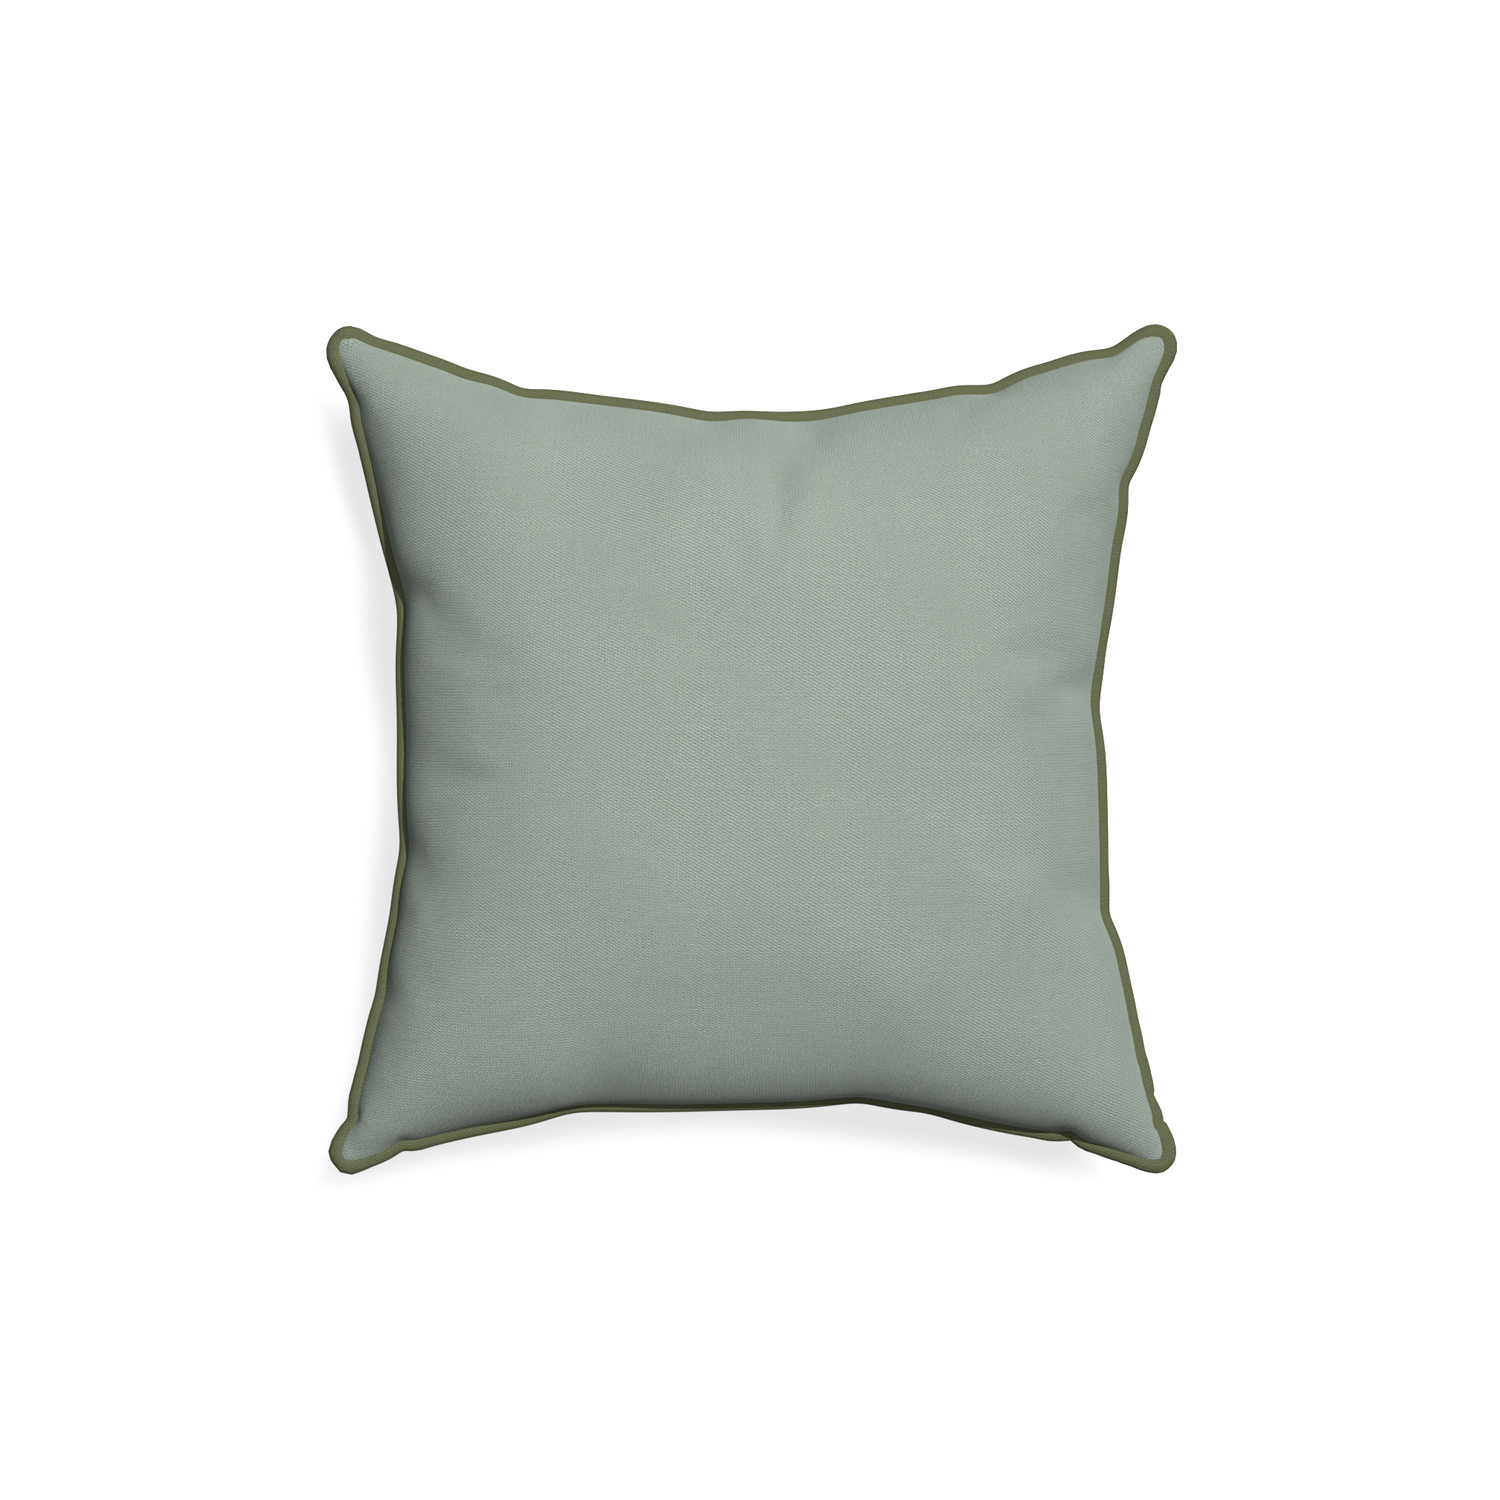 18-square sage custom pillow with f piping on white background